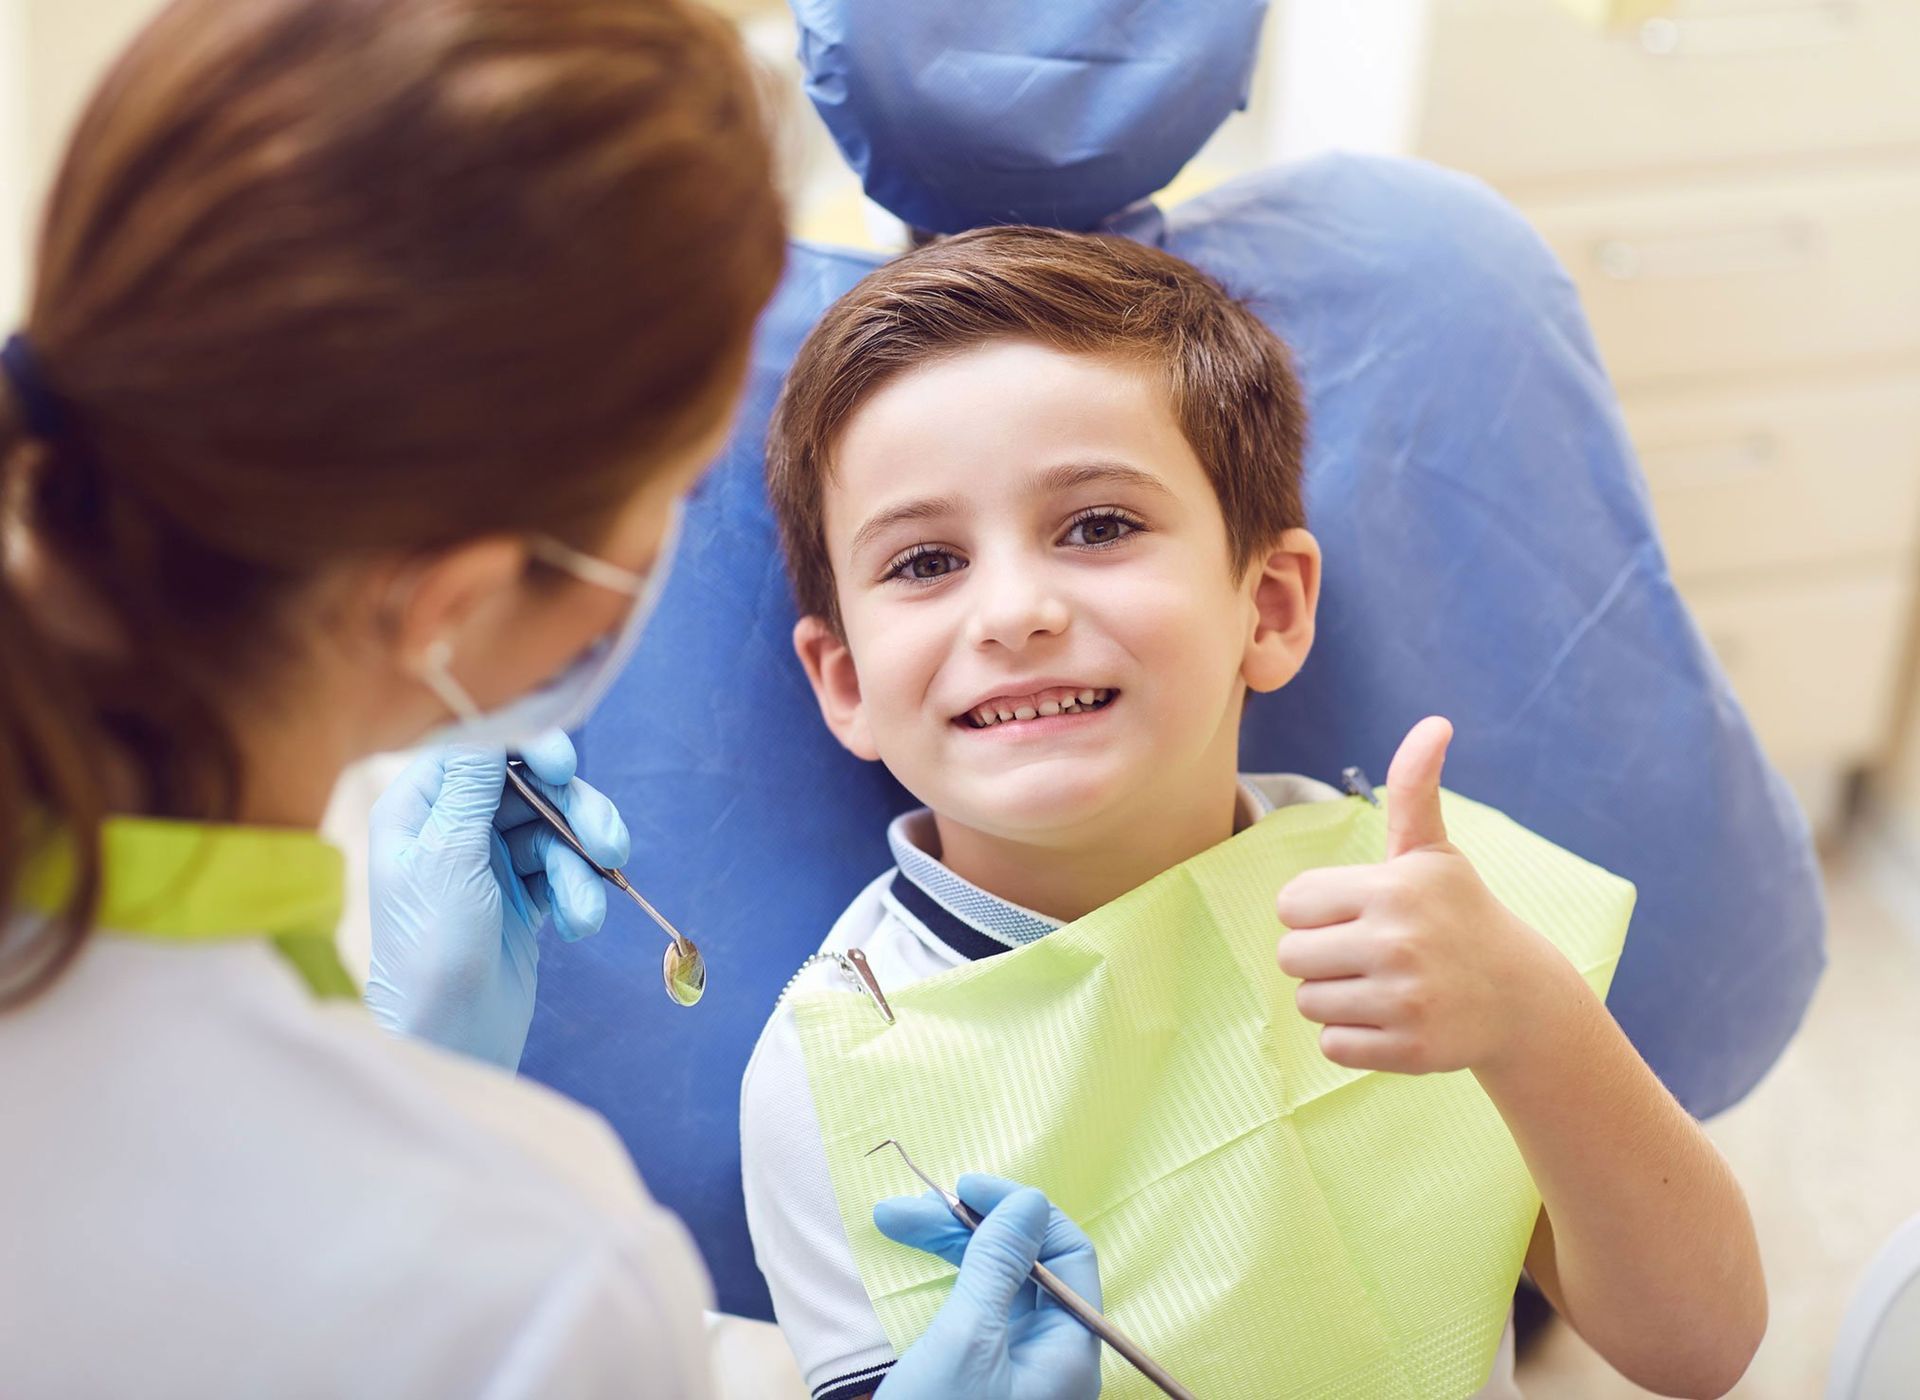 A young boy is giving a thumbs up while sitting in a dental chair.